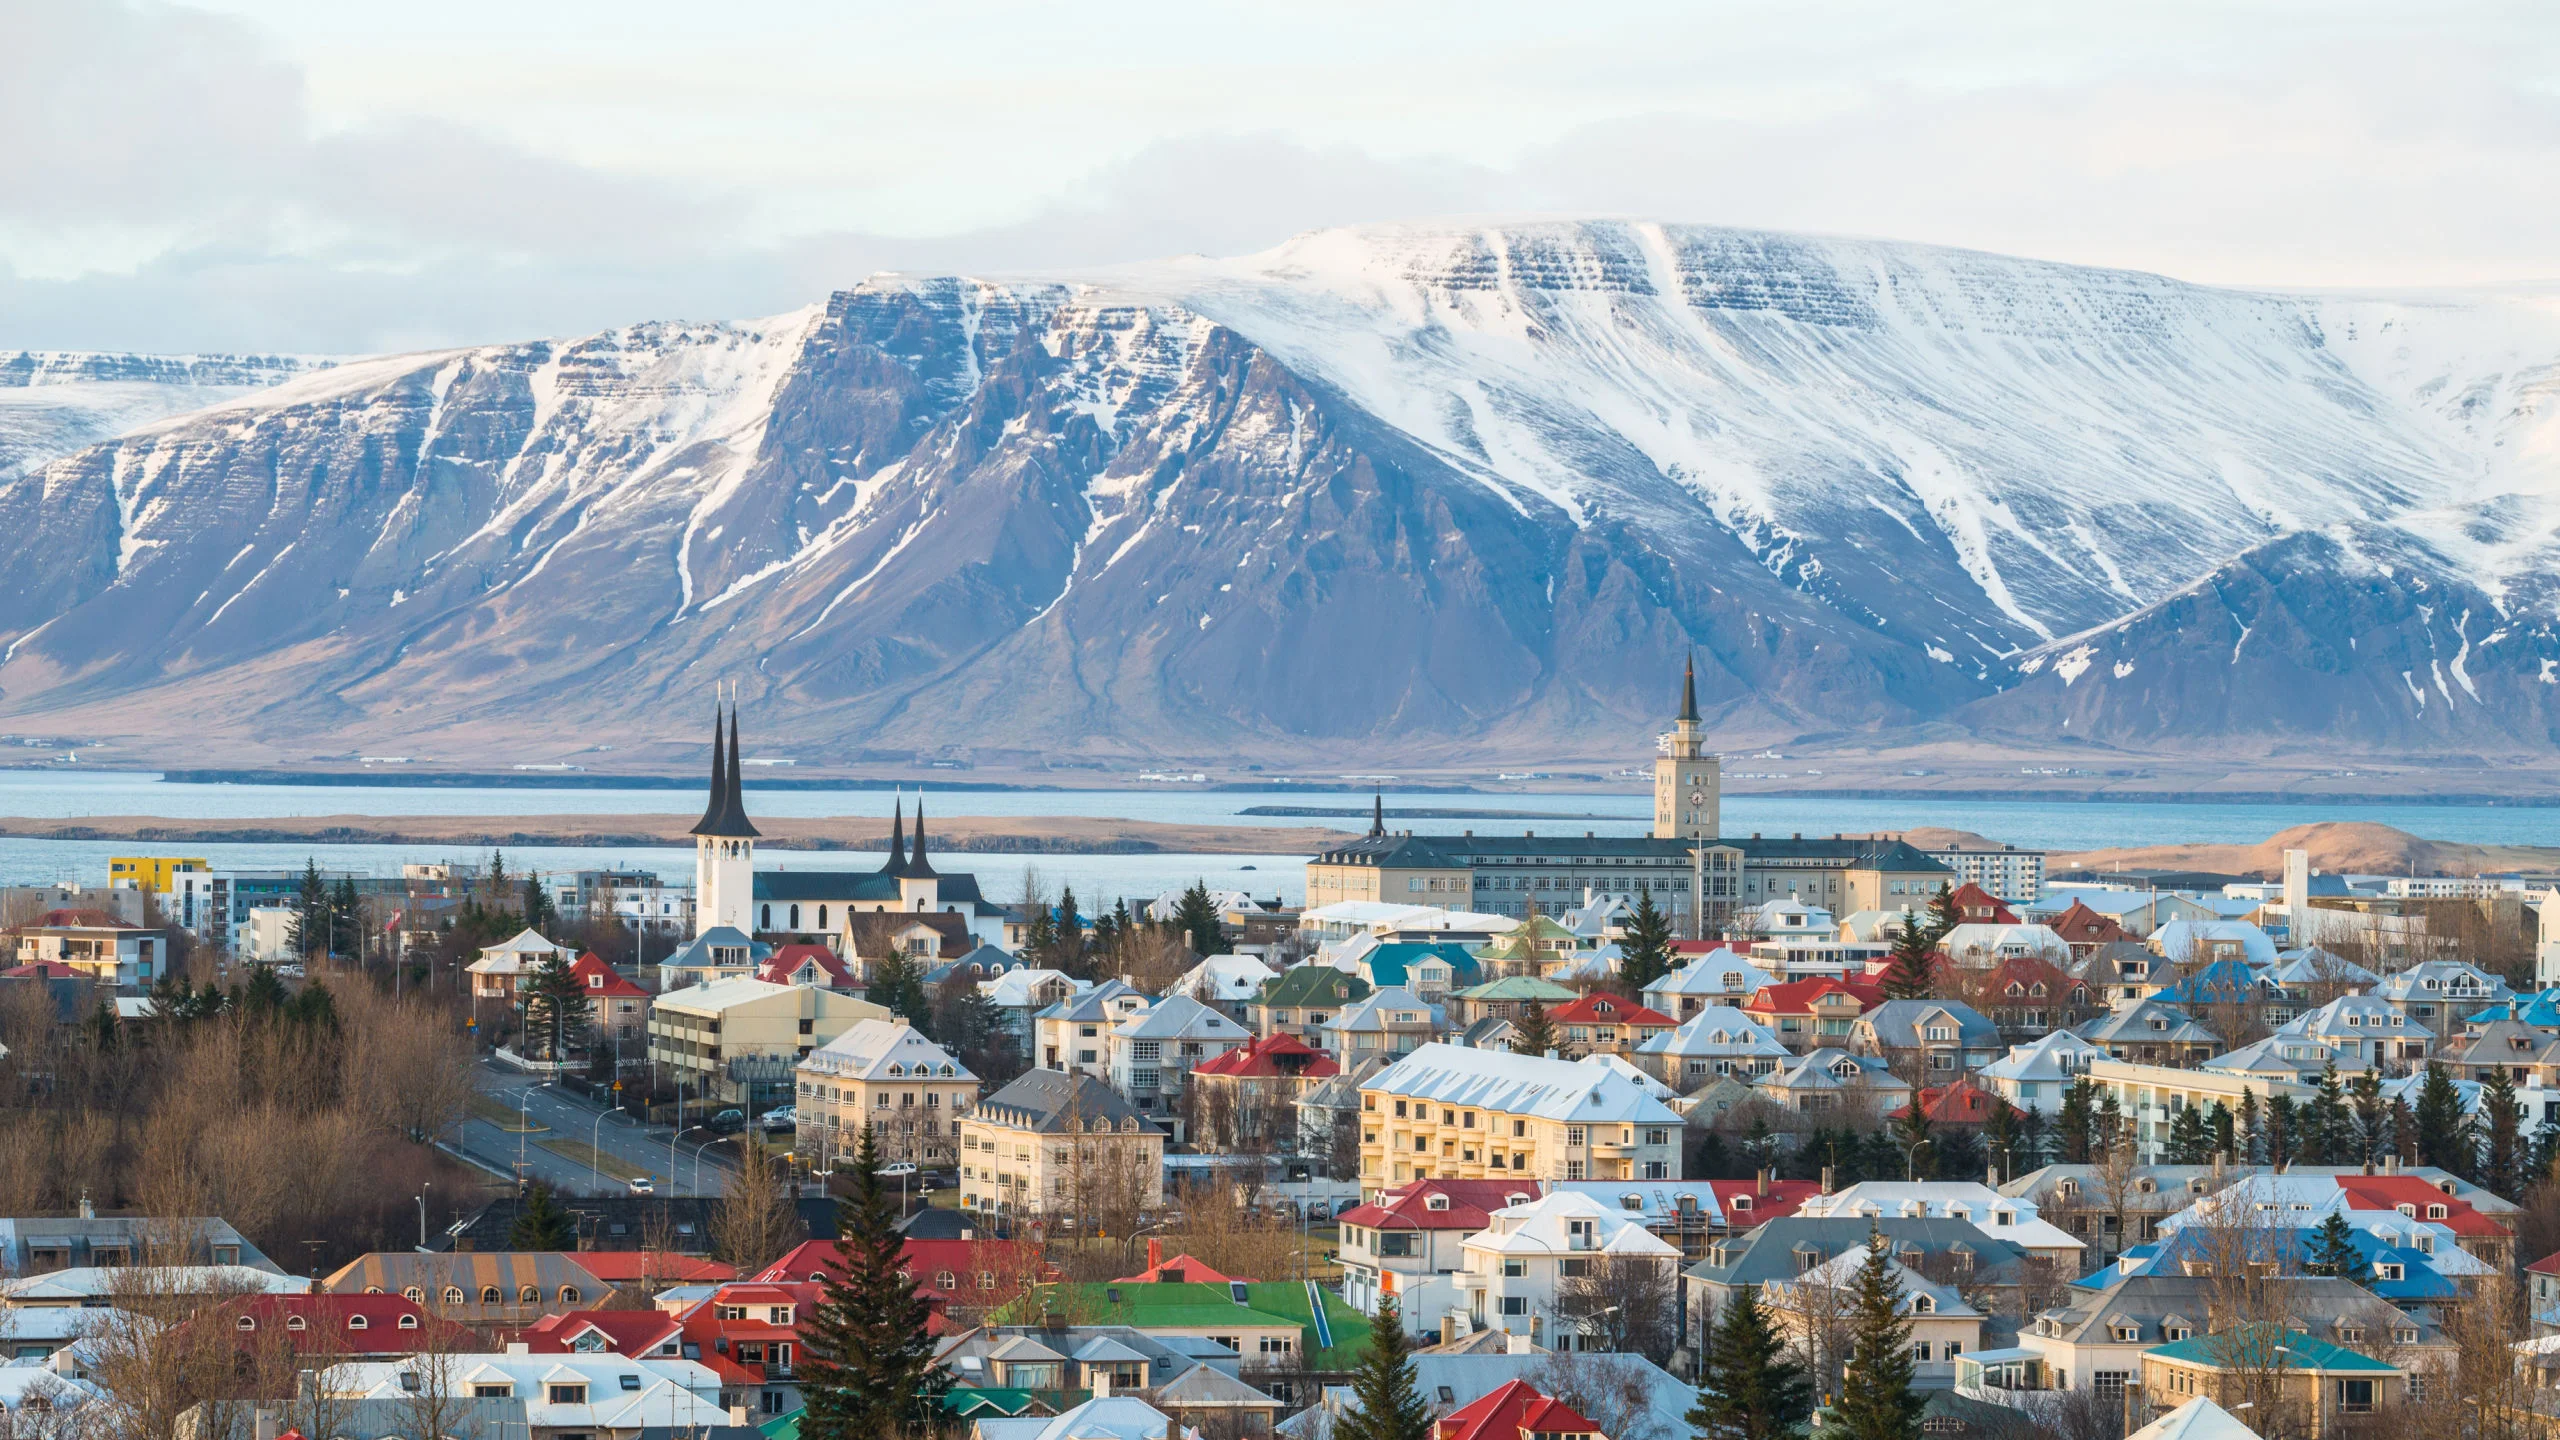 View of Reykjavik, the capital city of Iceland.